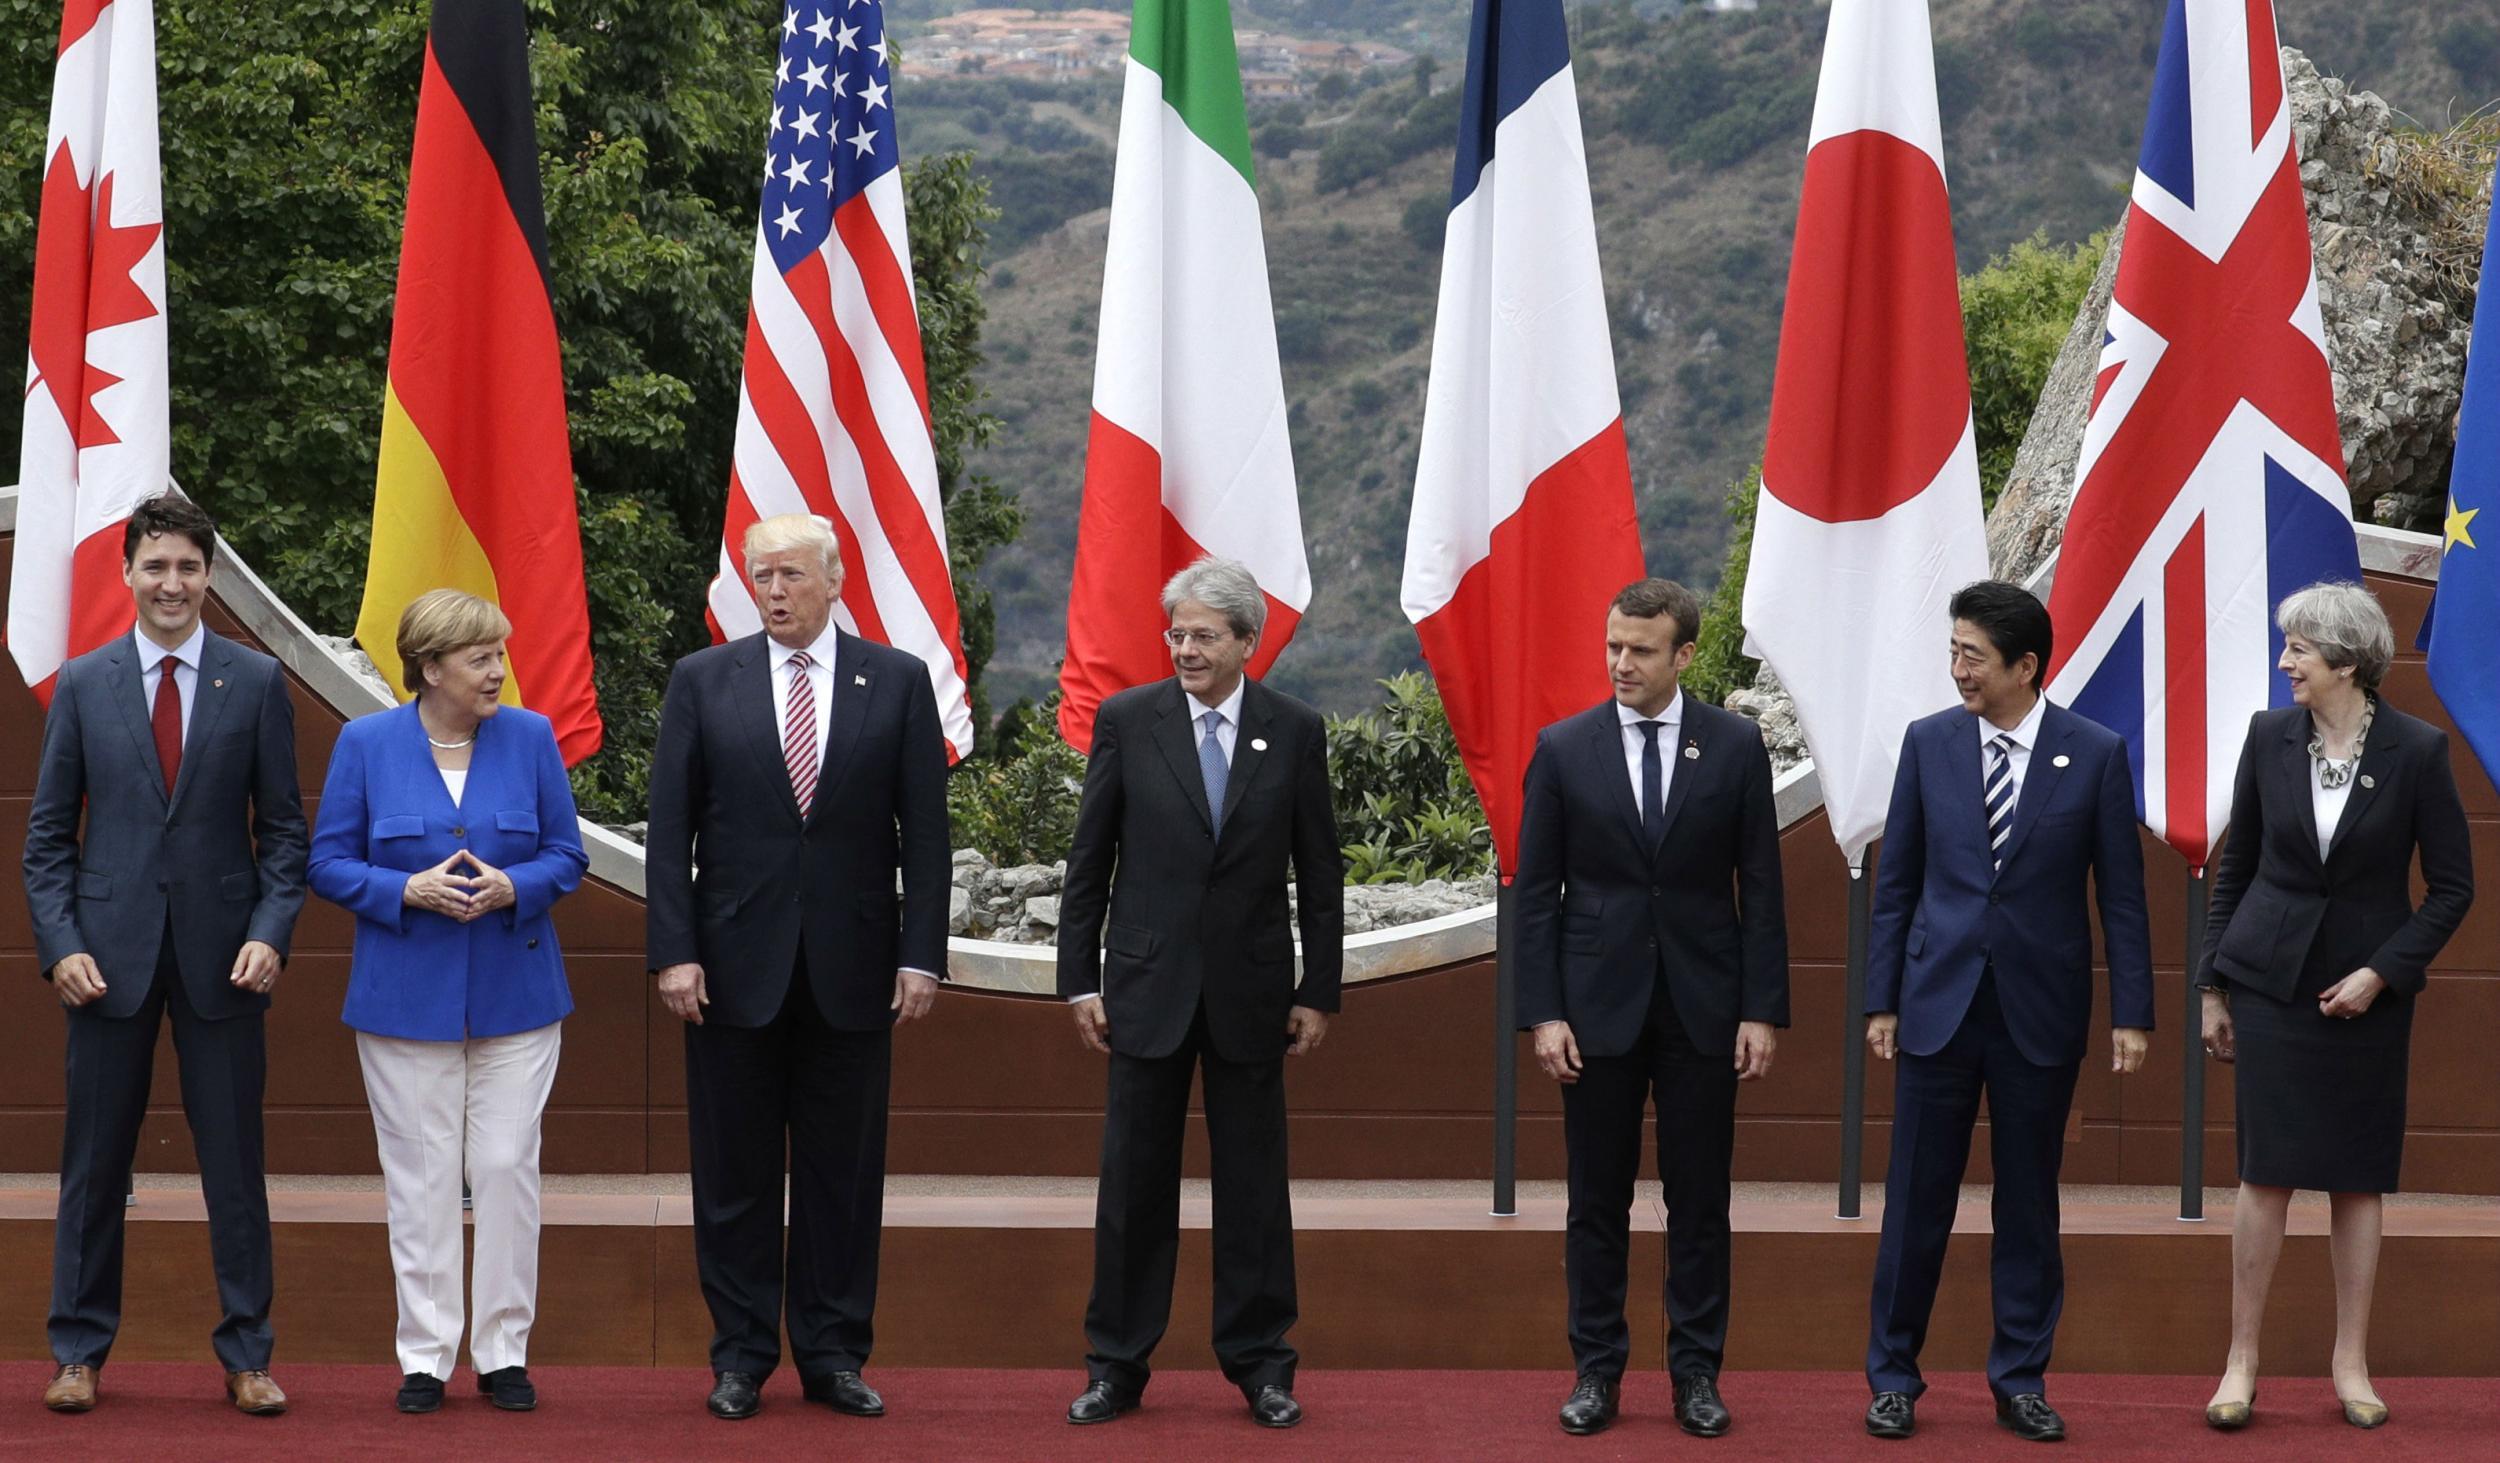 G7 summit Leaders pressure Donald Trump on climate change pact but